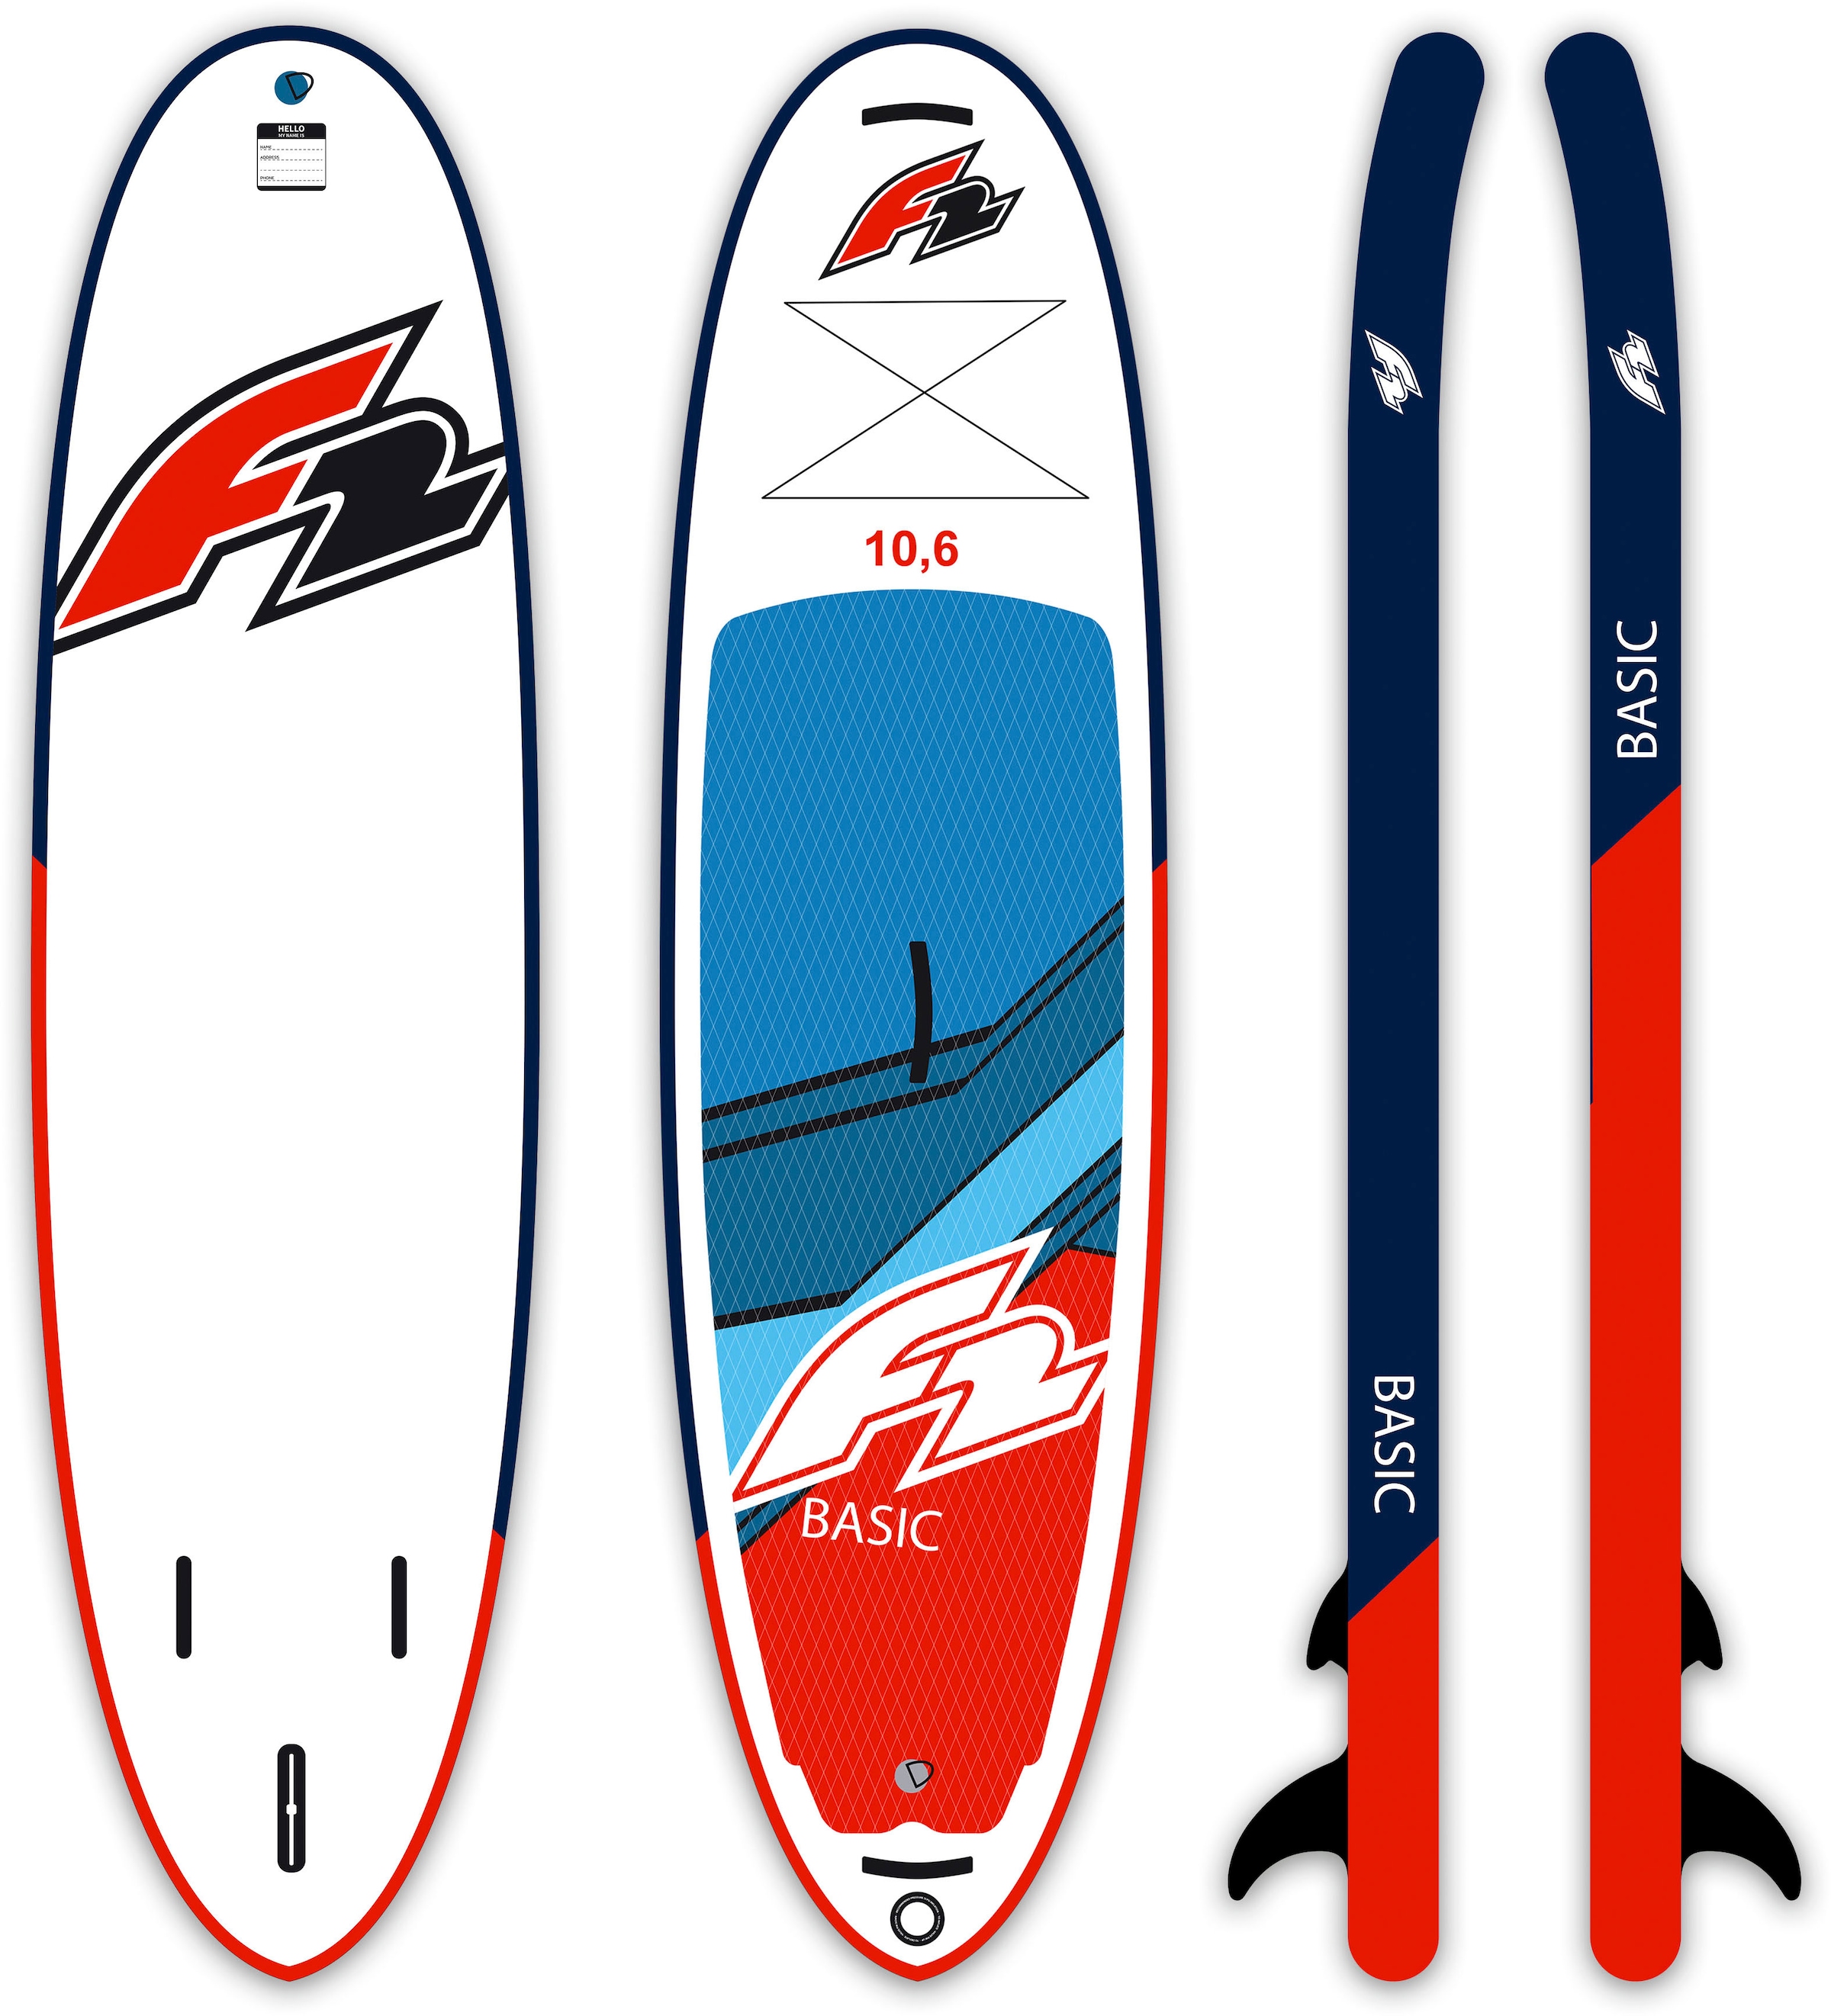 6 »Basic bei F2 Roundsail (Set, F2 SUP-Board inkl. Inflatable red«, 10,6 Rund-/Windsegel) tlg.,